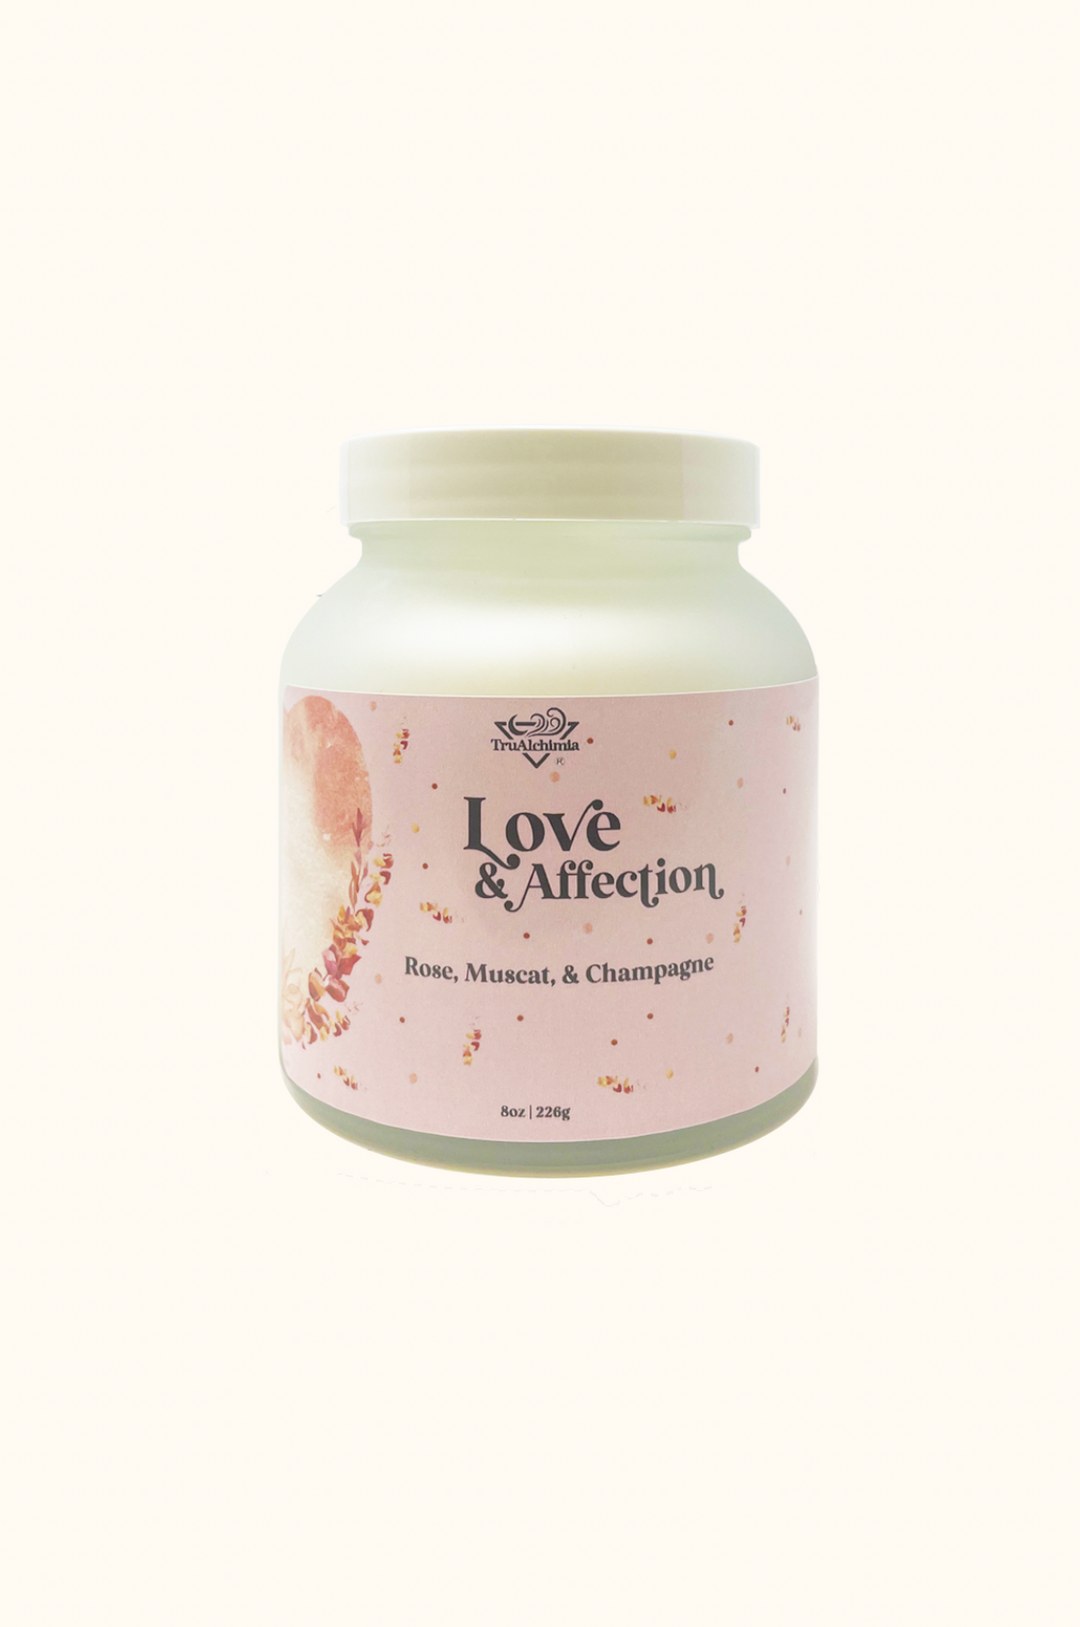 Love & Affection Candle